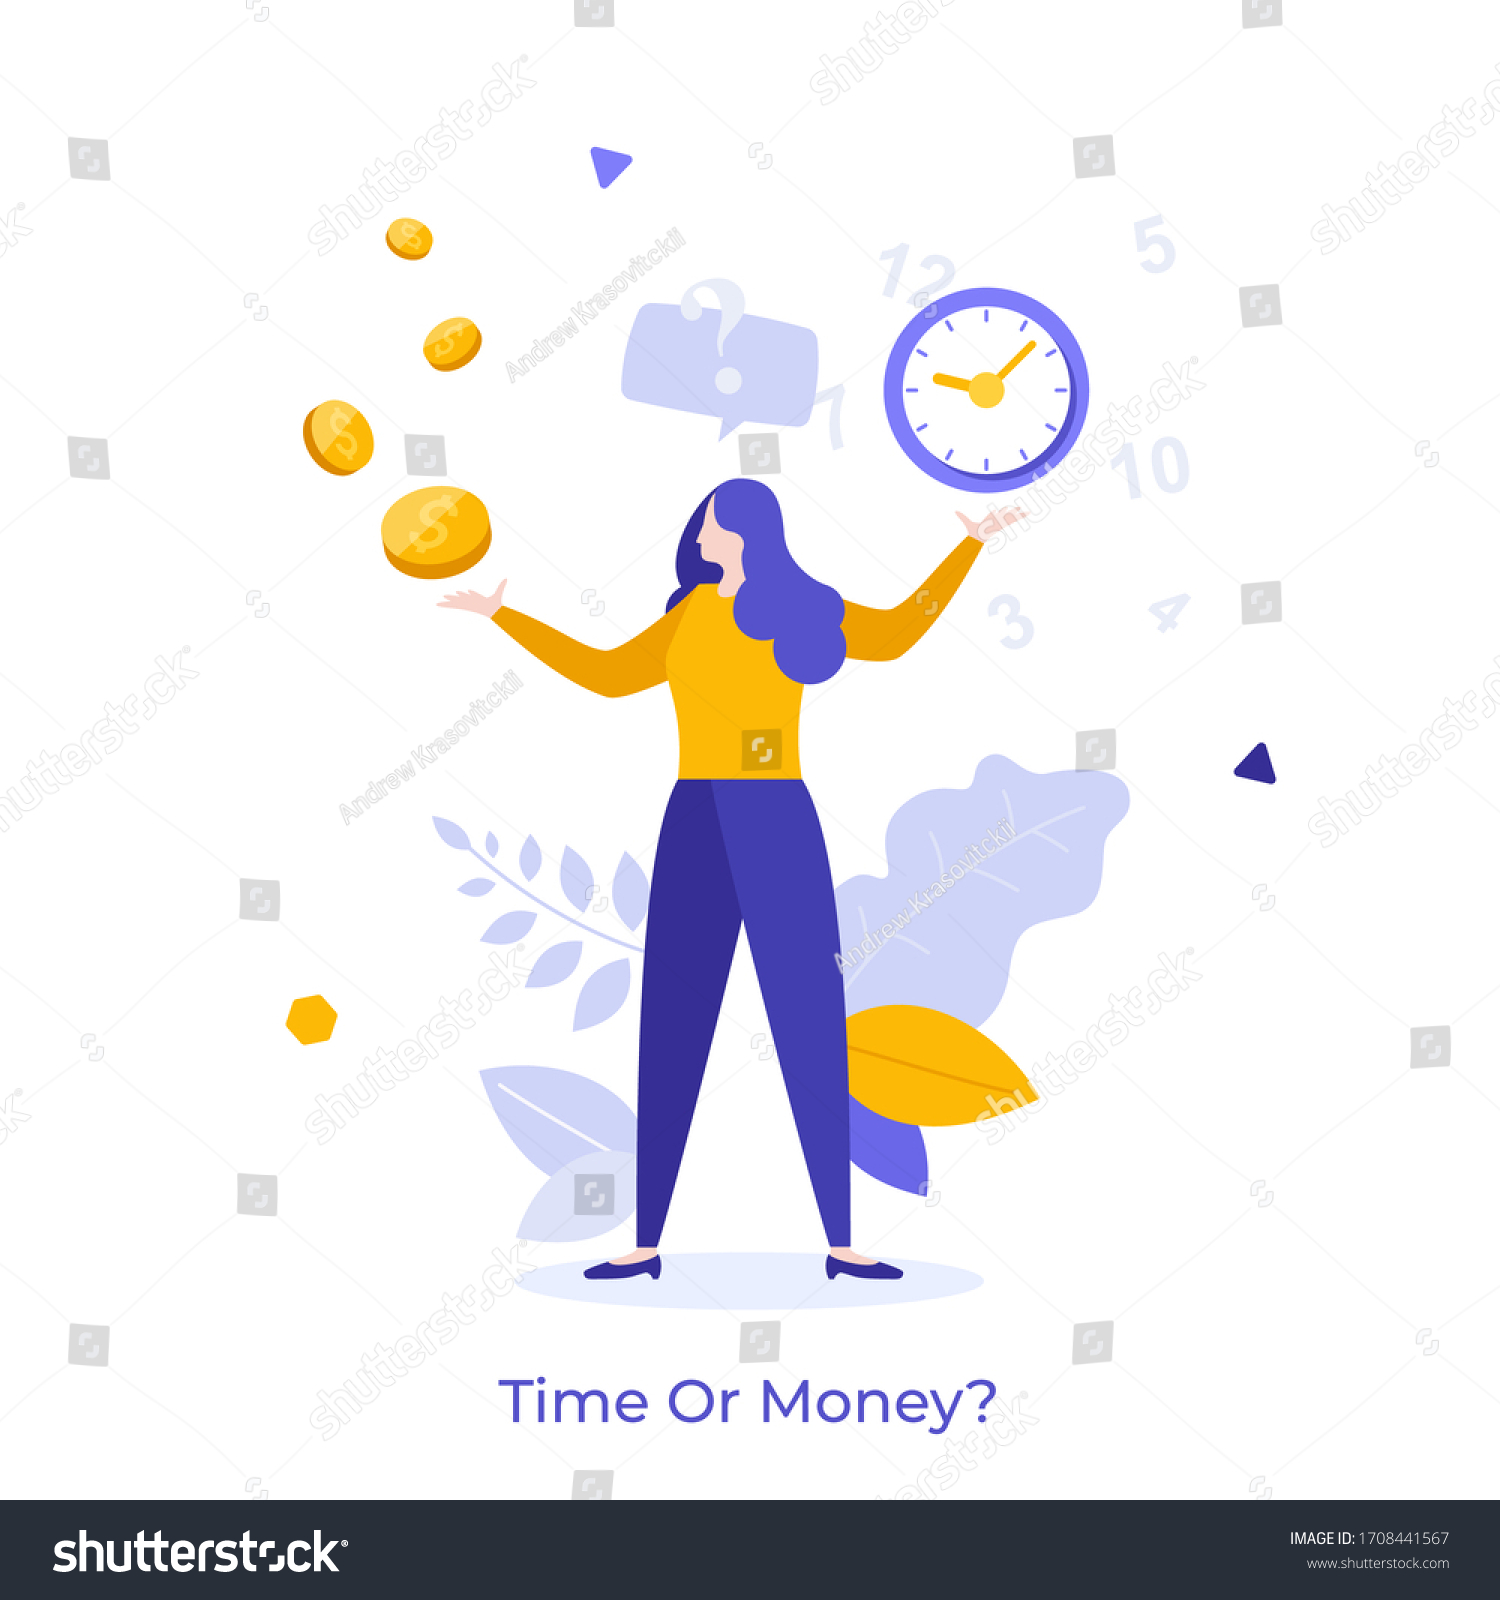 SVG of Woman resolving dilemma, making decision or choosing between two options or alternatives, clock and dollar coins. Concept of time or money, work-life balance. Modern flat colorful vector illustration. svg